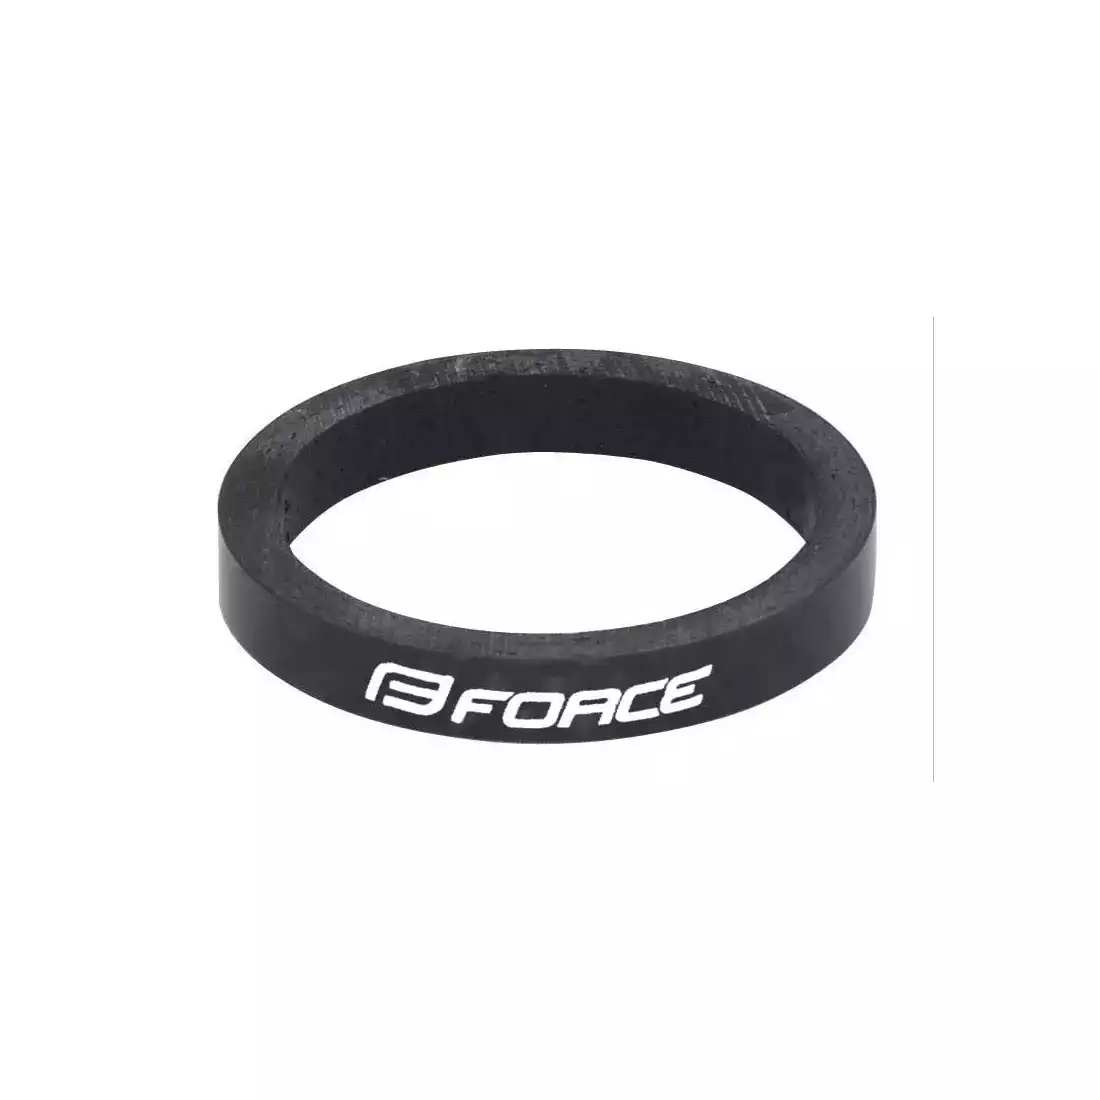 FORCE AHEAD CARBON carbon washer for rudders  1 1/8“  5 mm